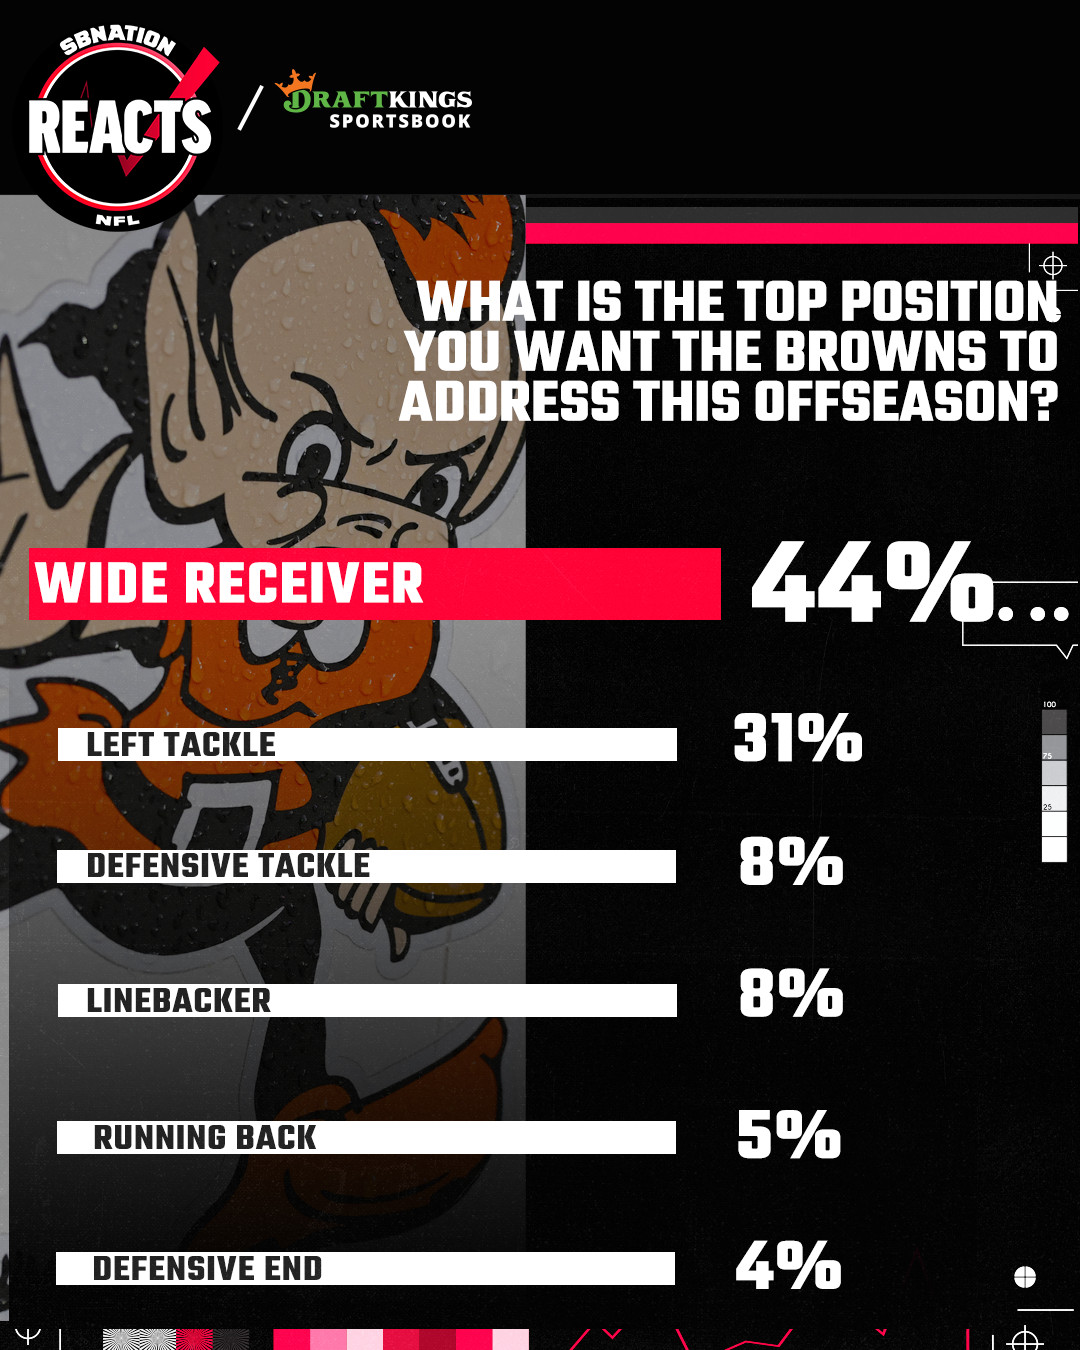 browns fans want the wr or lt positions addressed the most this offseason